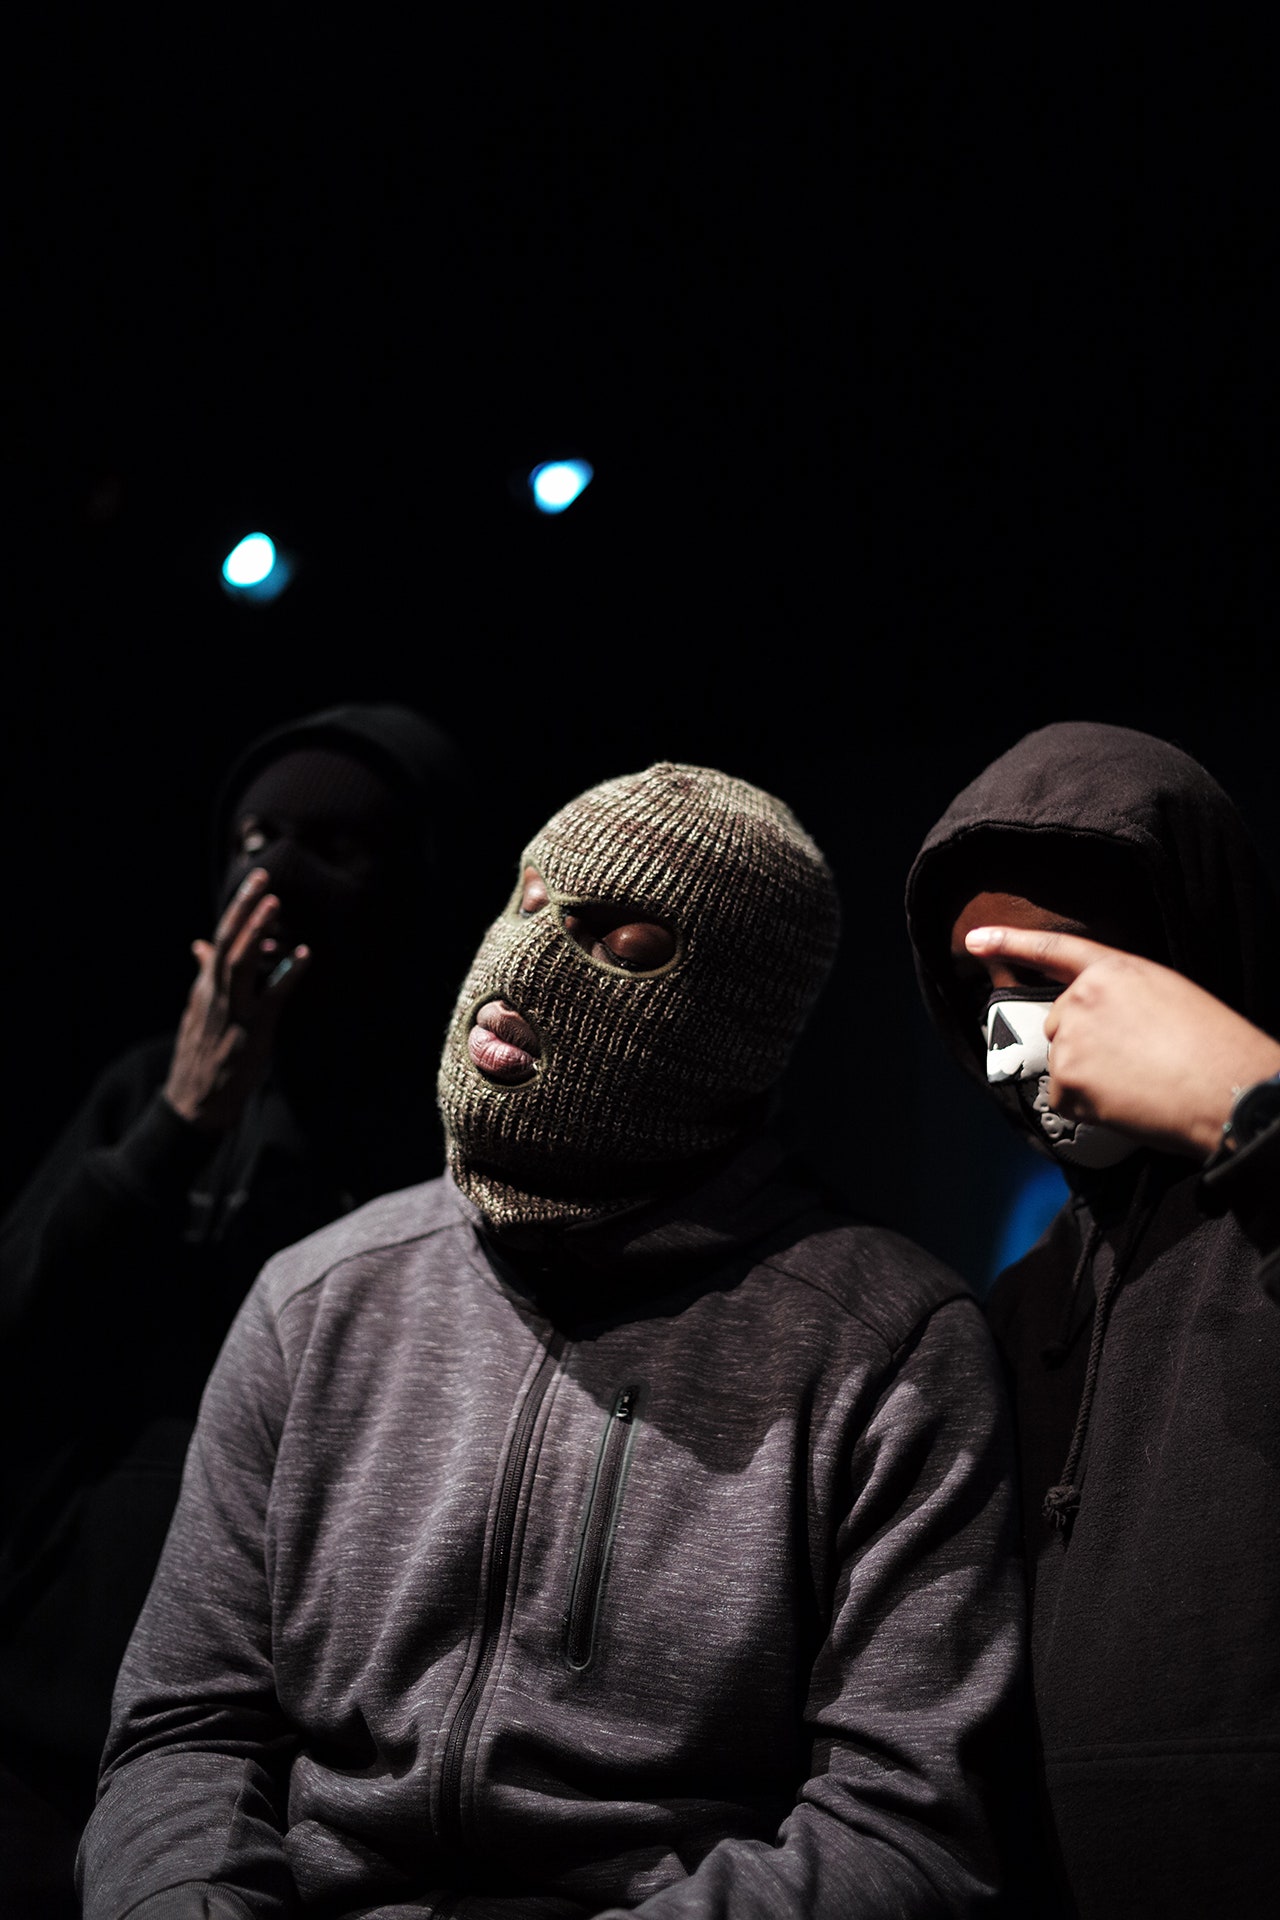 Drill music UK can theatre challenge misconceptions British GQ